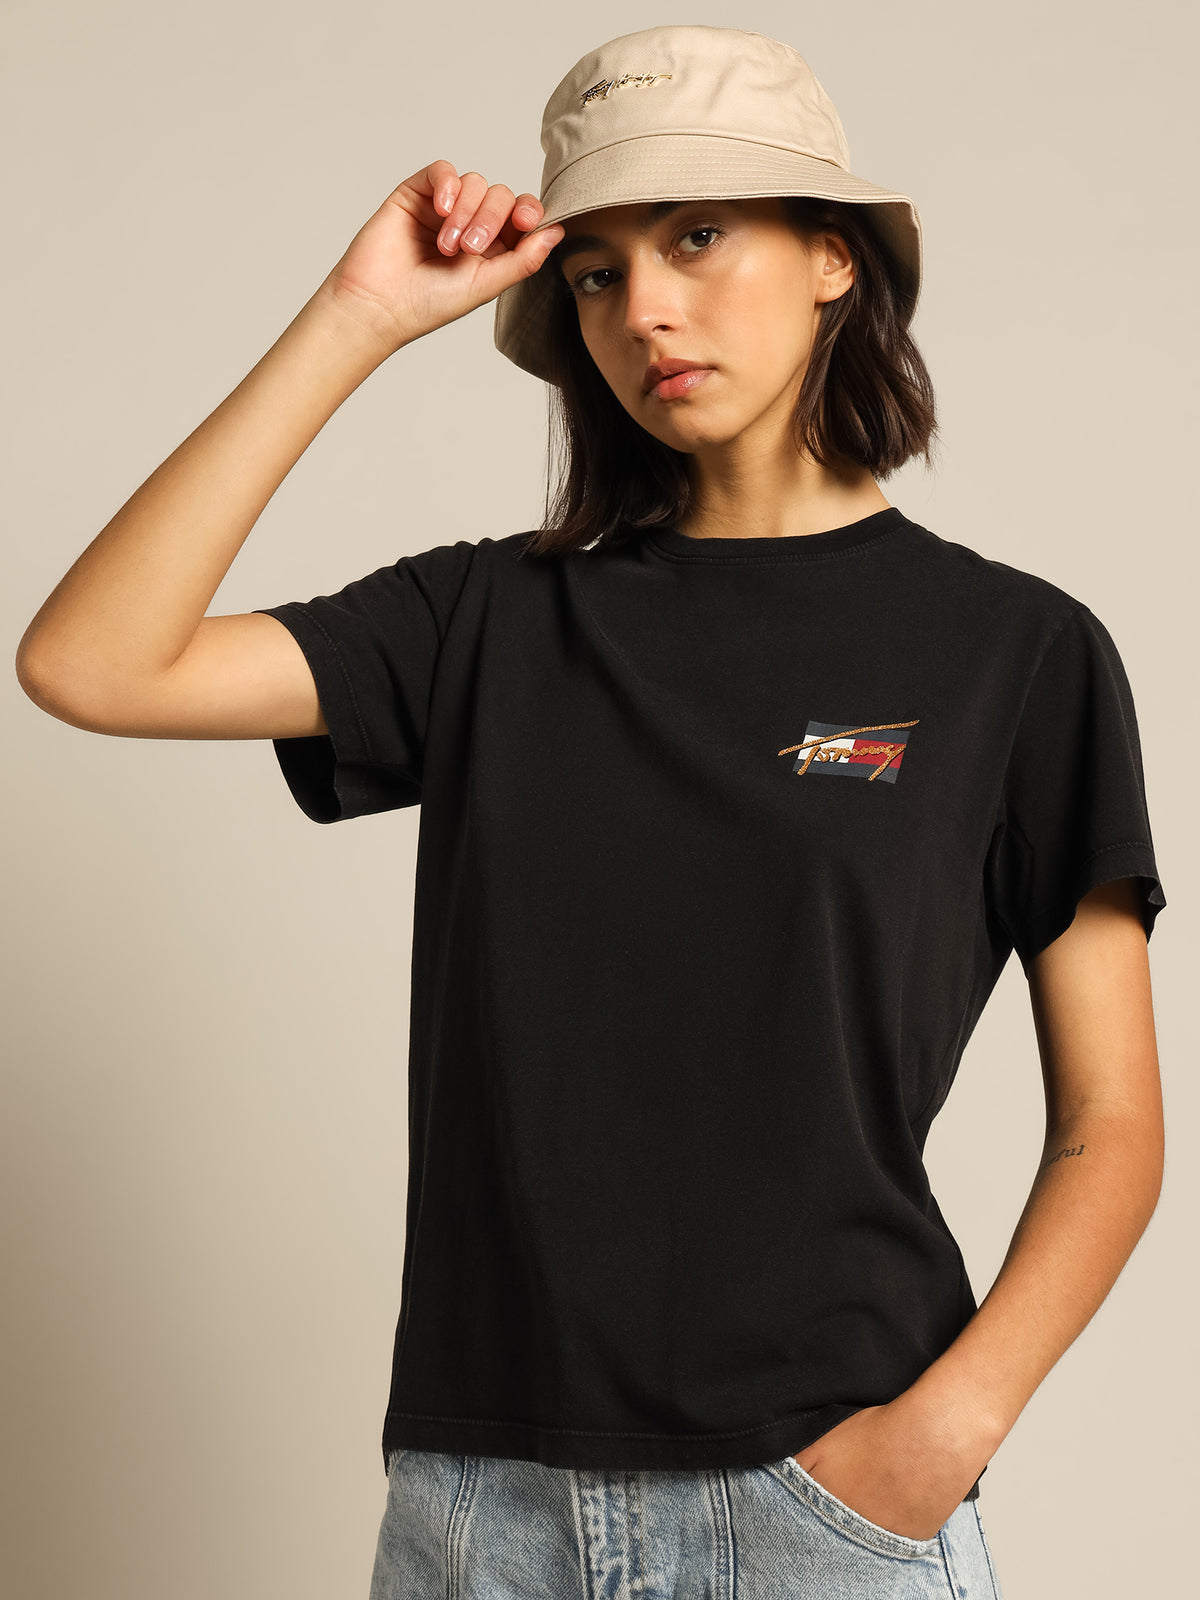 Relaxed Vintage Bronze T-Shirt in Black